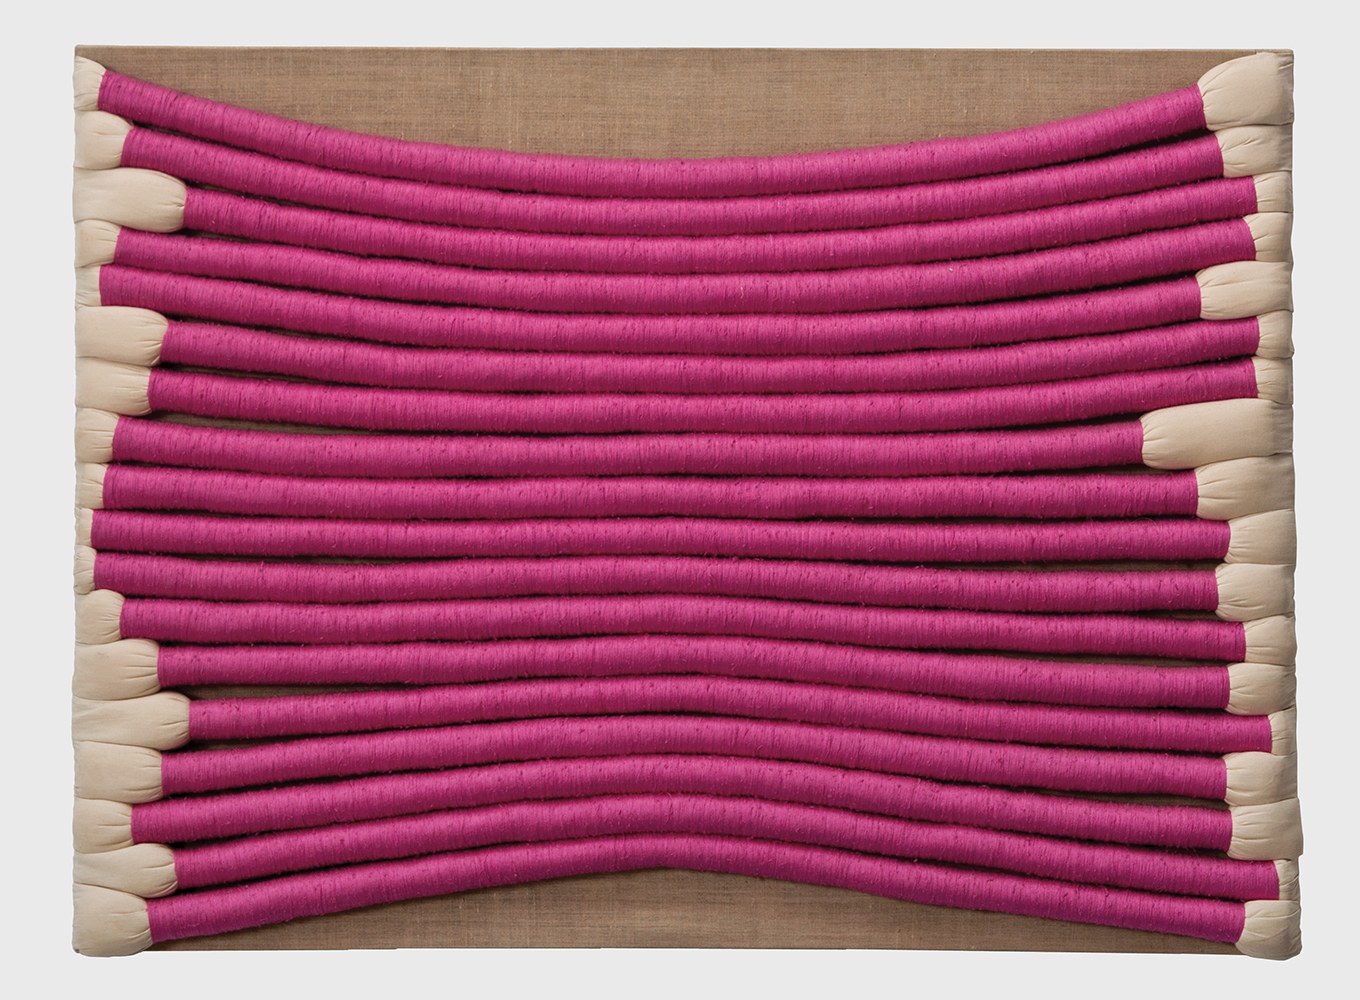 Sheila Hicks exhibits &quot;Free Threads&quot;